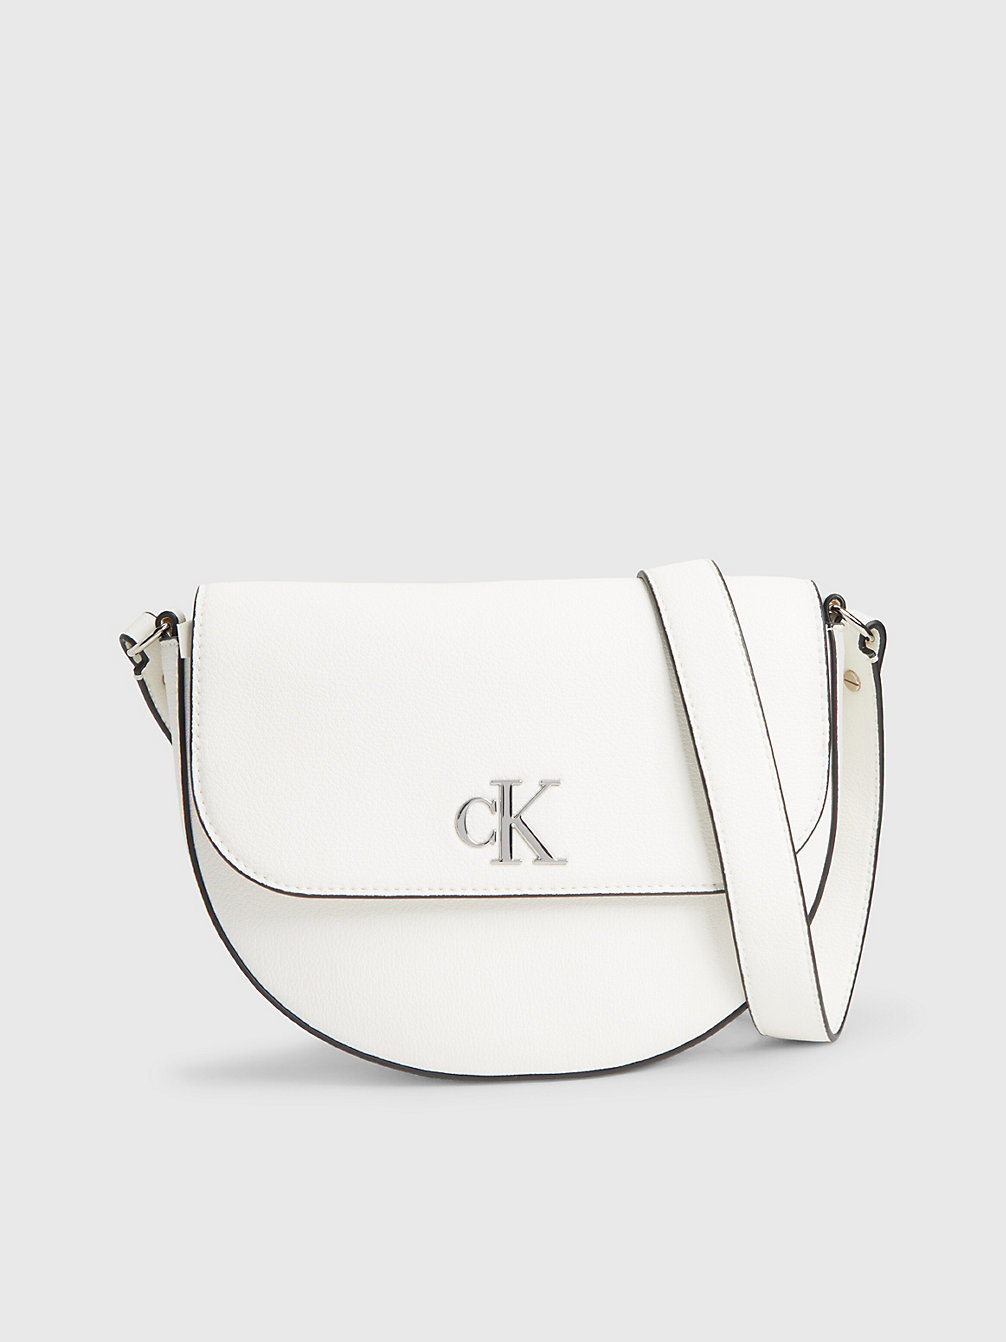 BRIGHT WHITE Recycled Crossbody Bag undefined women Calvin Klein